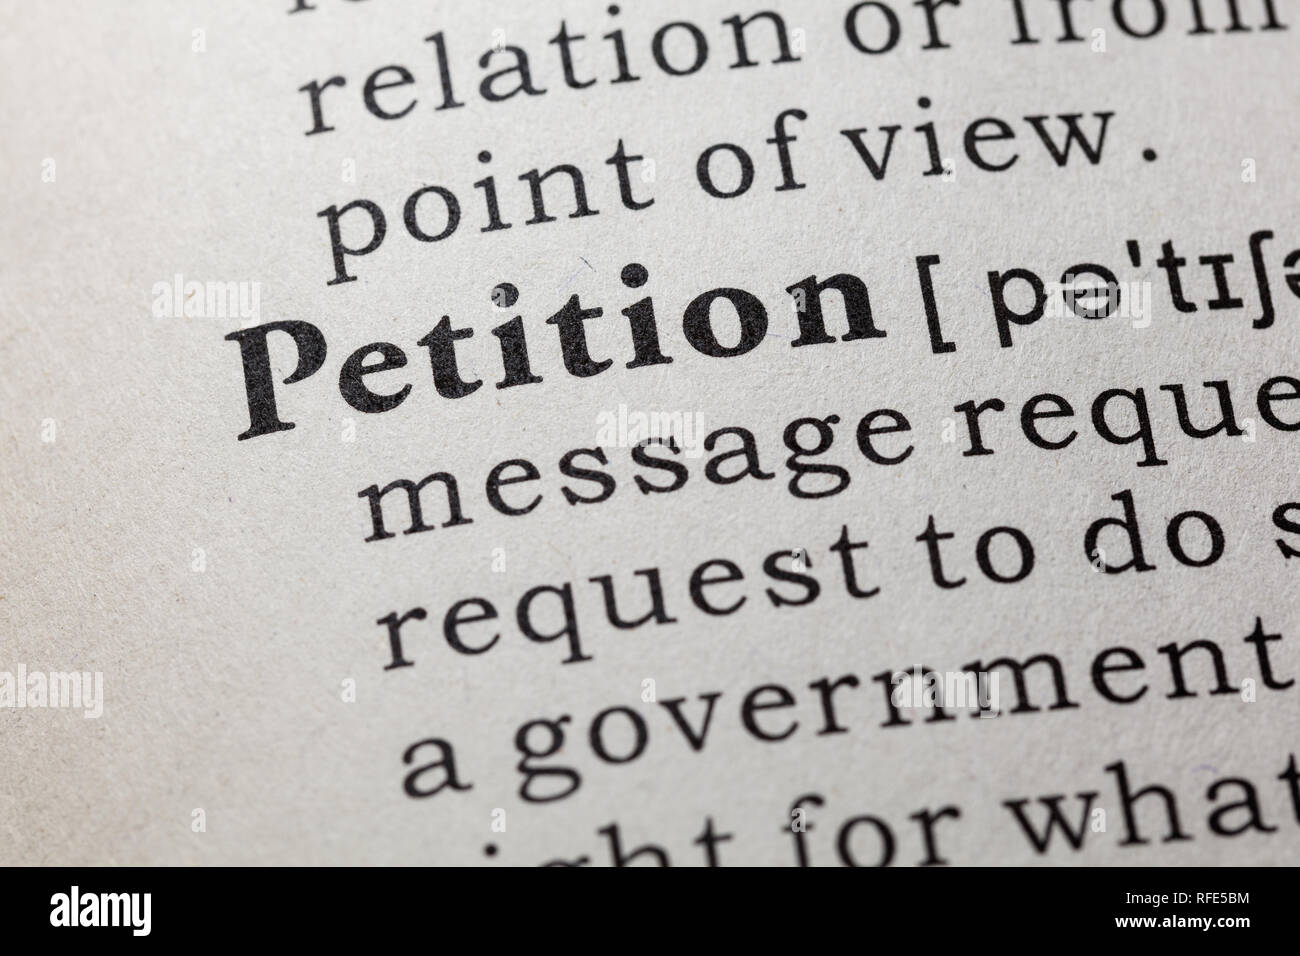 Fake Dictionary, Dictionary definition of the word petition. including key descriptive words. Stock Photo